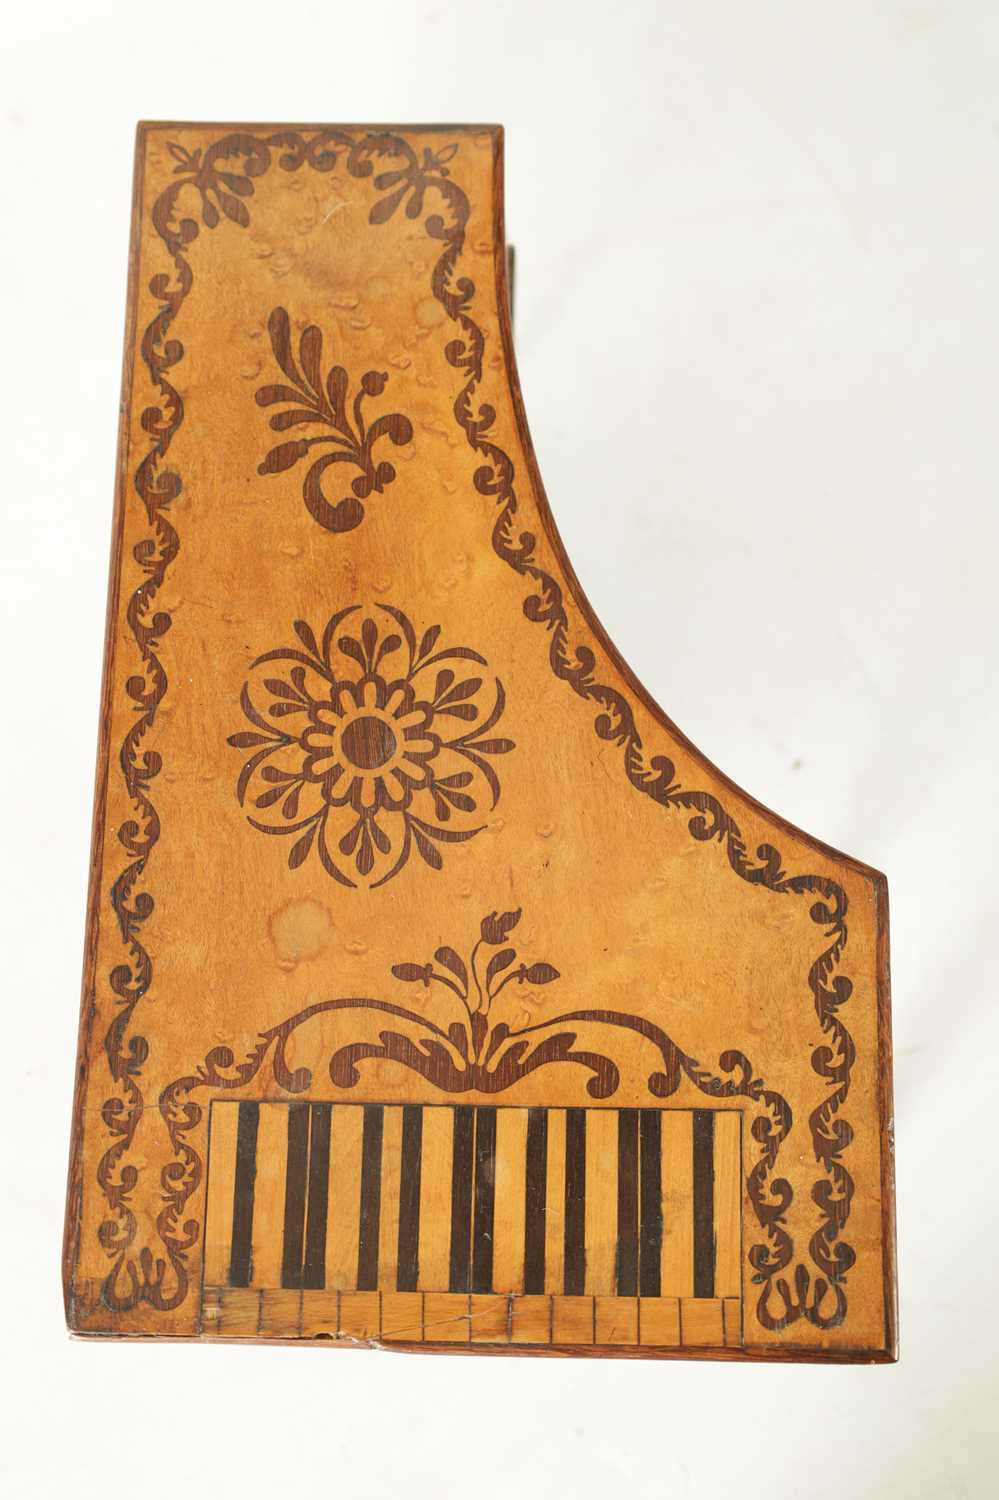 A MID 19TH CENTURY FRENCH MUSICAL INLAID SEWING BOX - Image 11 of 11